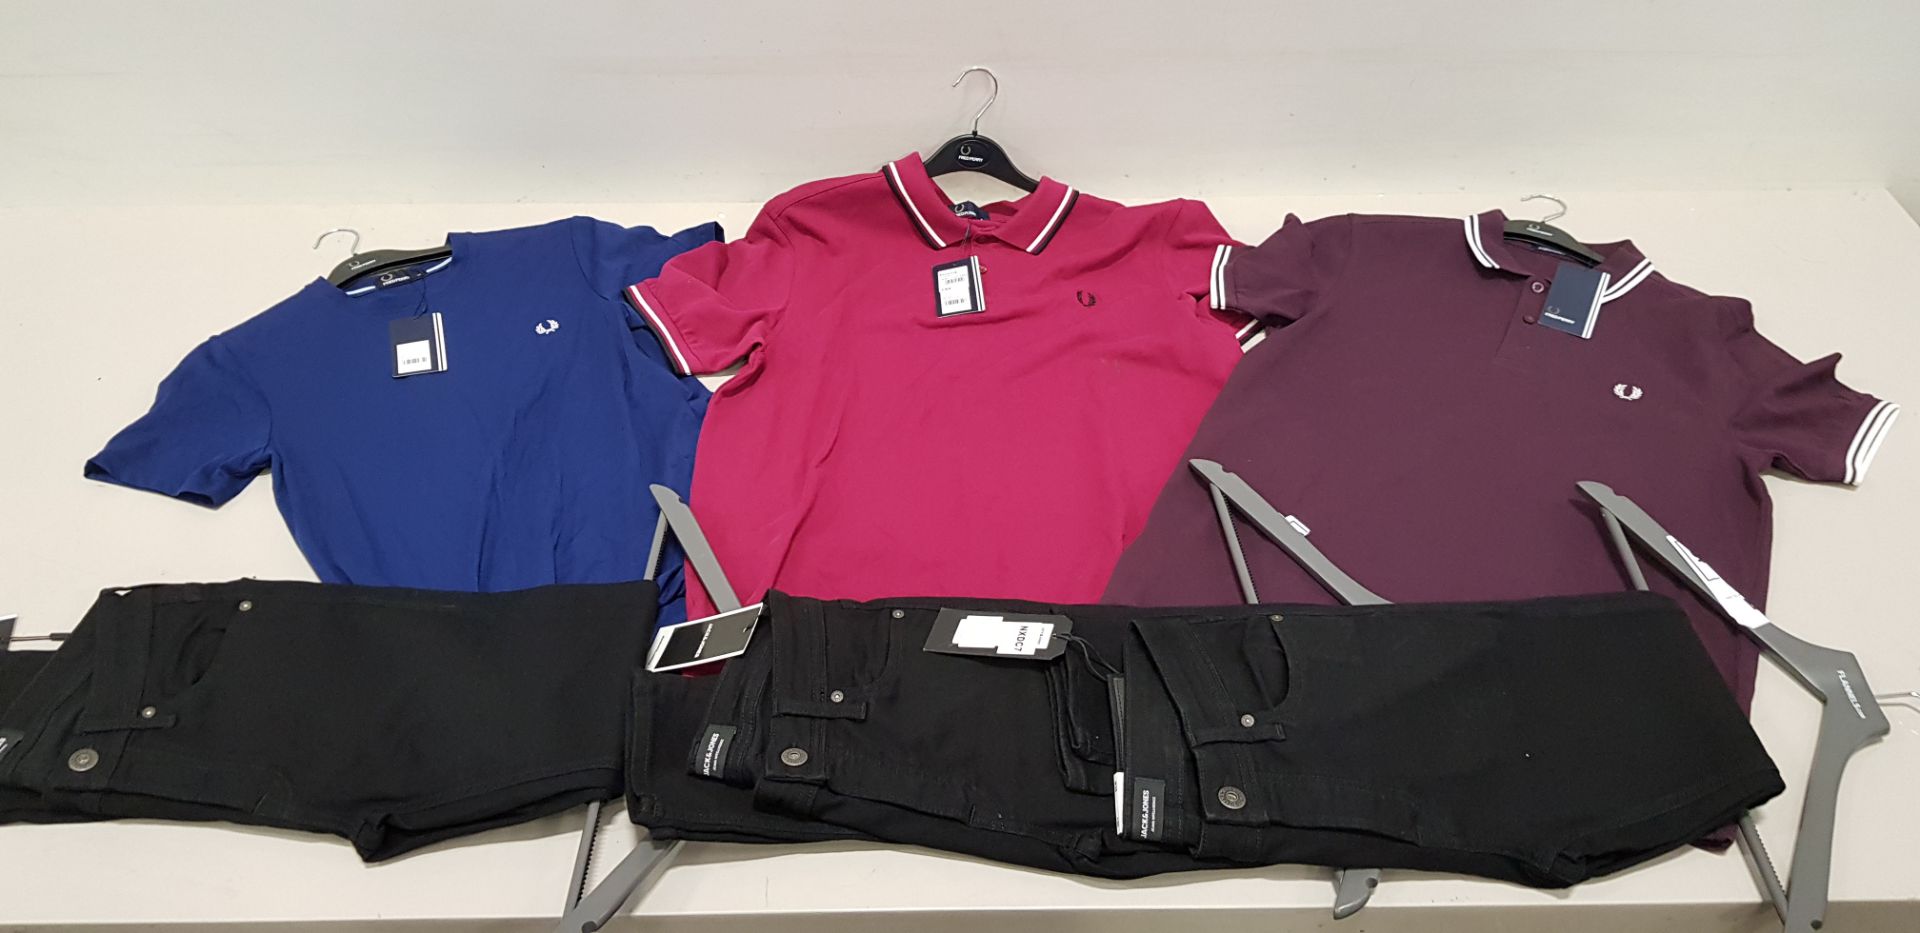 6 PIECE MIXED CLOTHING LOT CONTAINING 2 X FRED PERRY POLO SHIRTS, 1 X FRED PERRY CREWNECK SHIRT